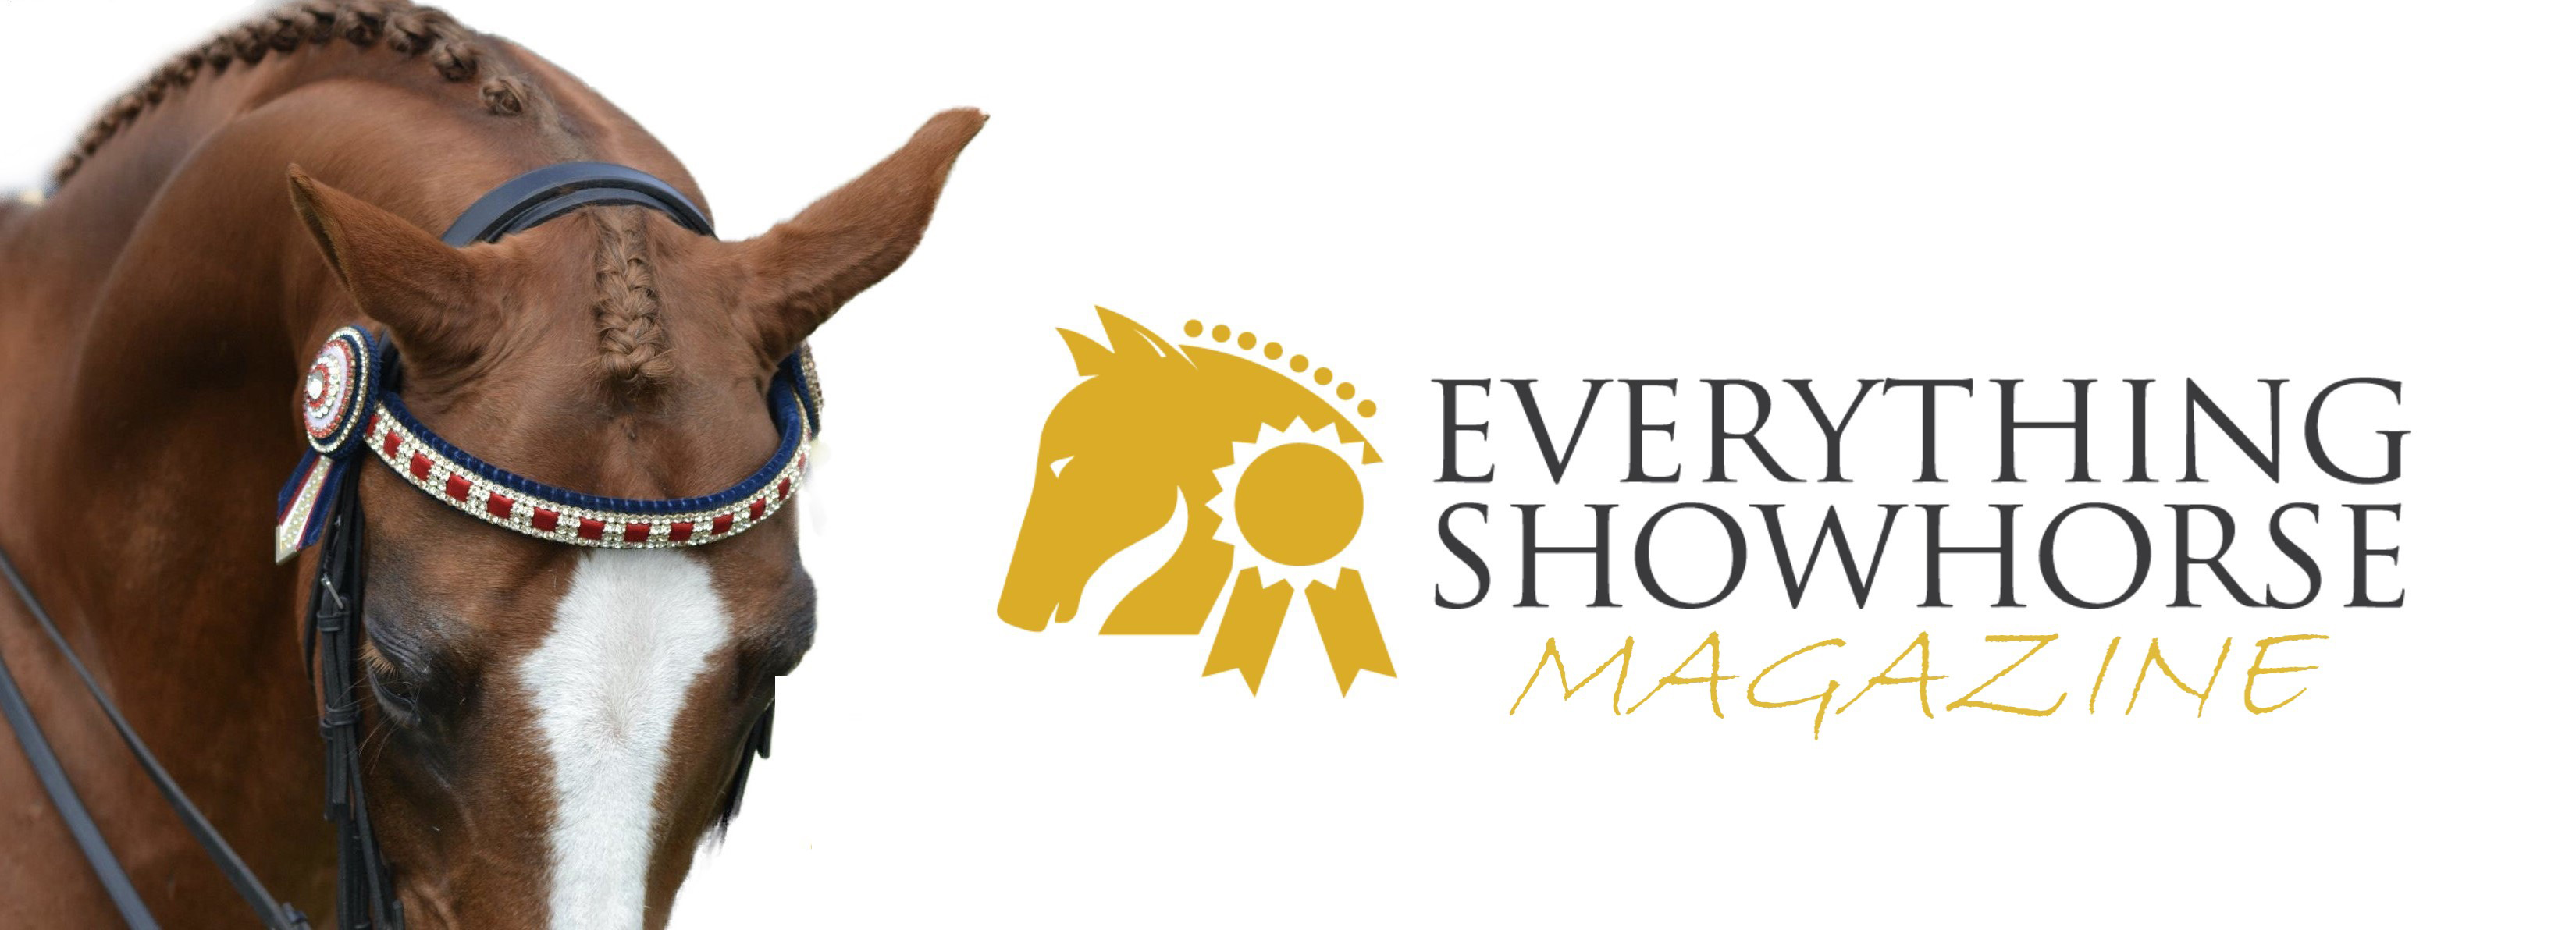 Everything Show Horse